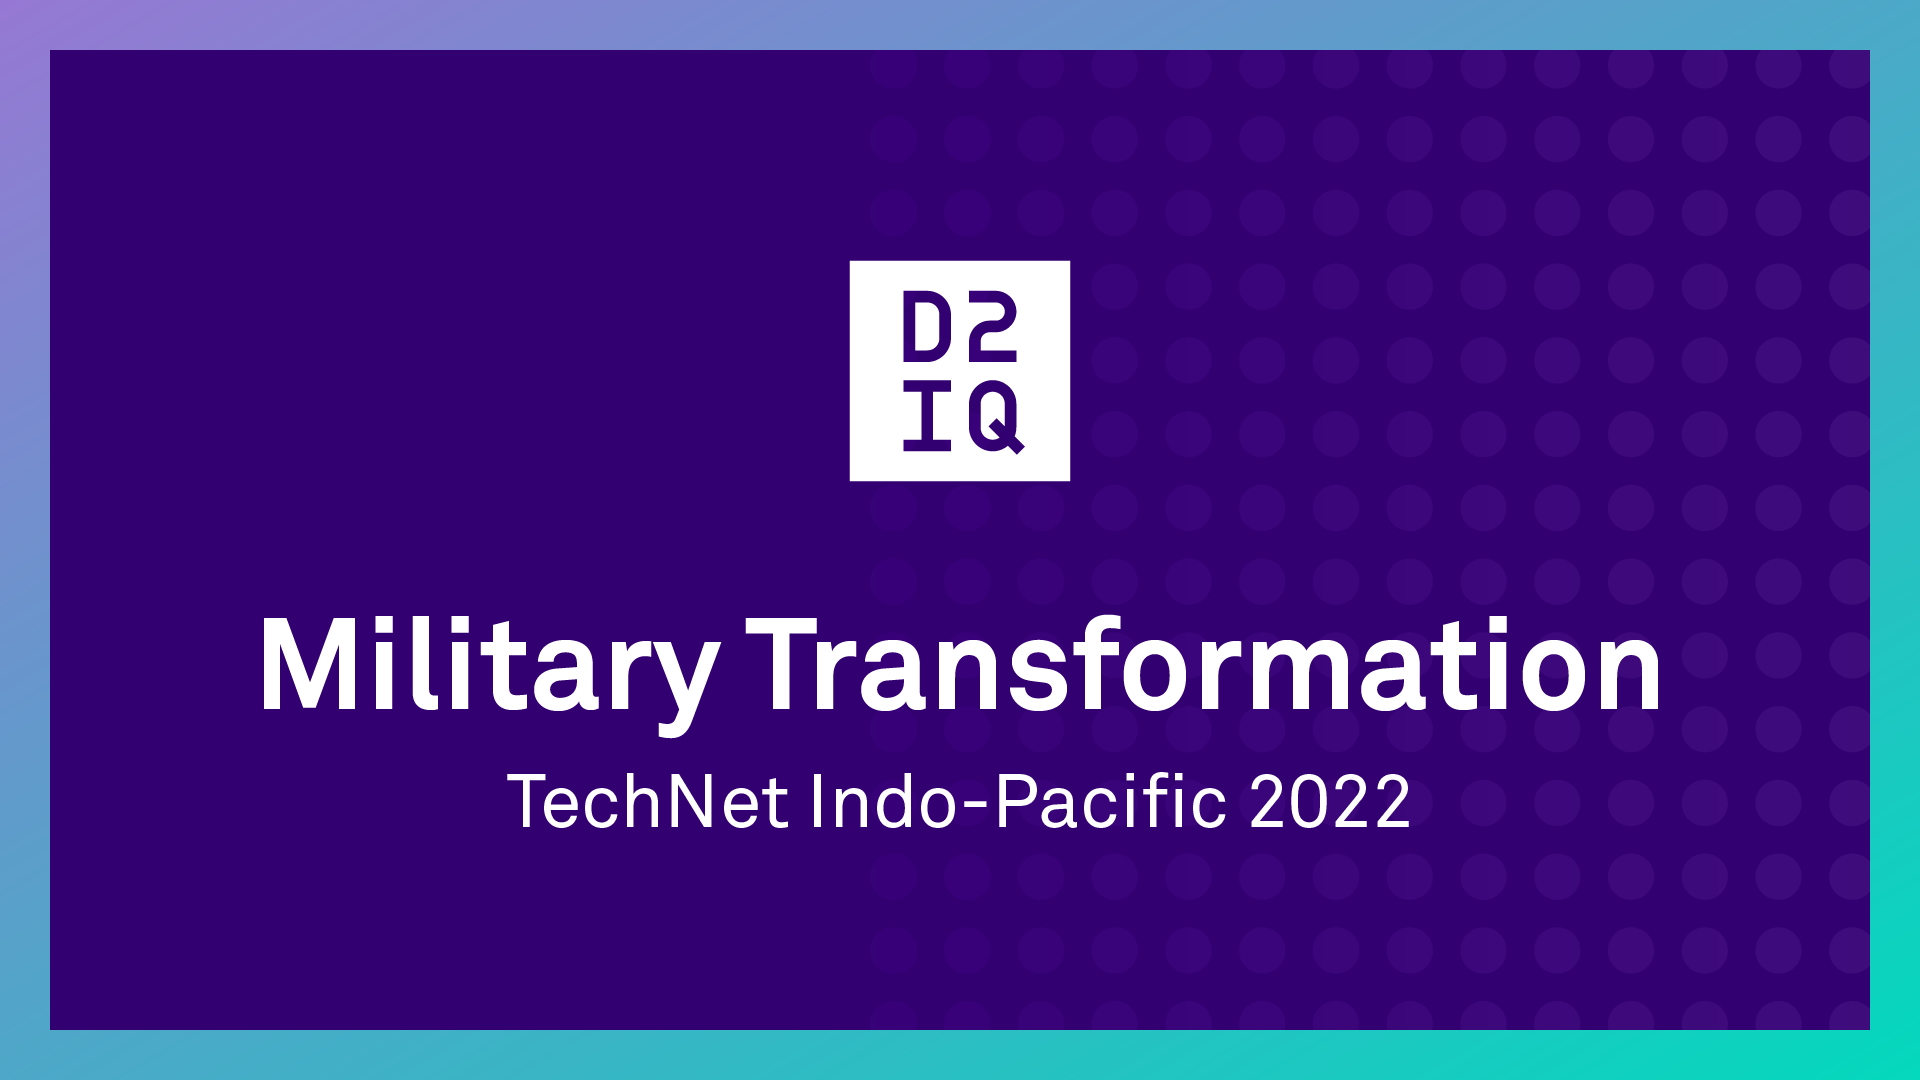 Military Transformation: TechNet Indo-Pacific 2022